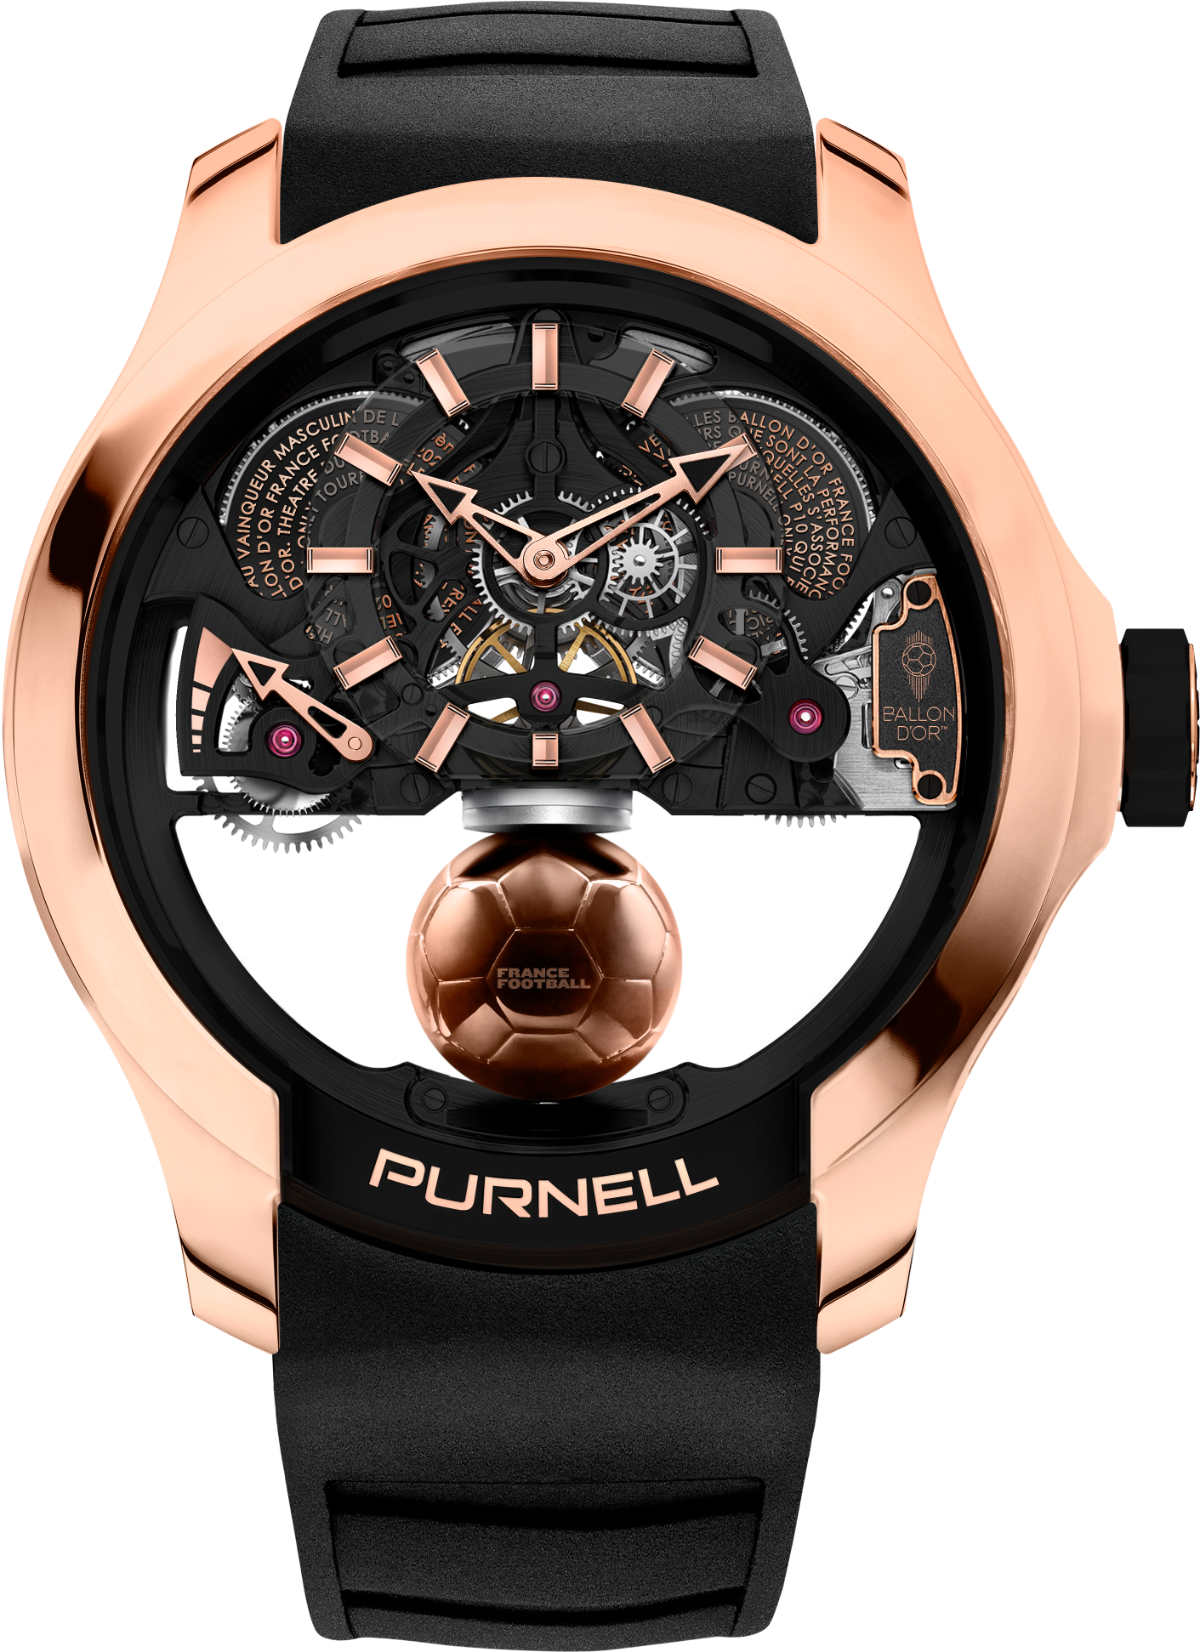 Purnell Official Partner Of The Ballon D’Or